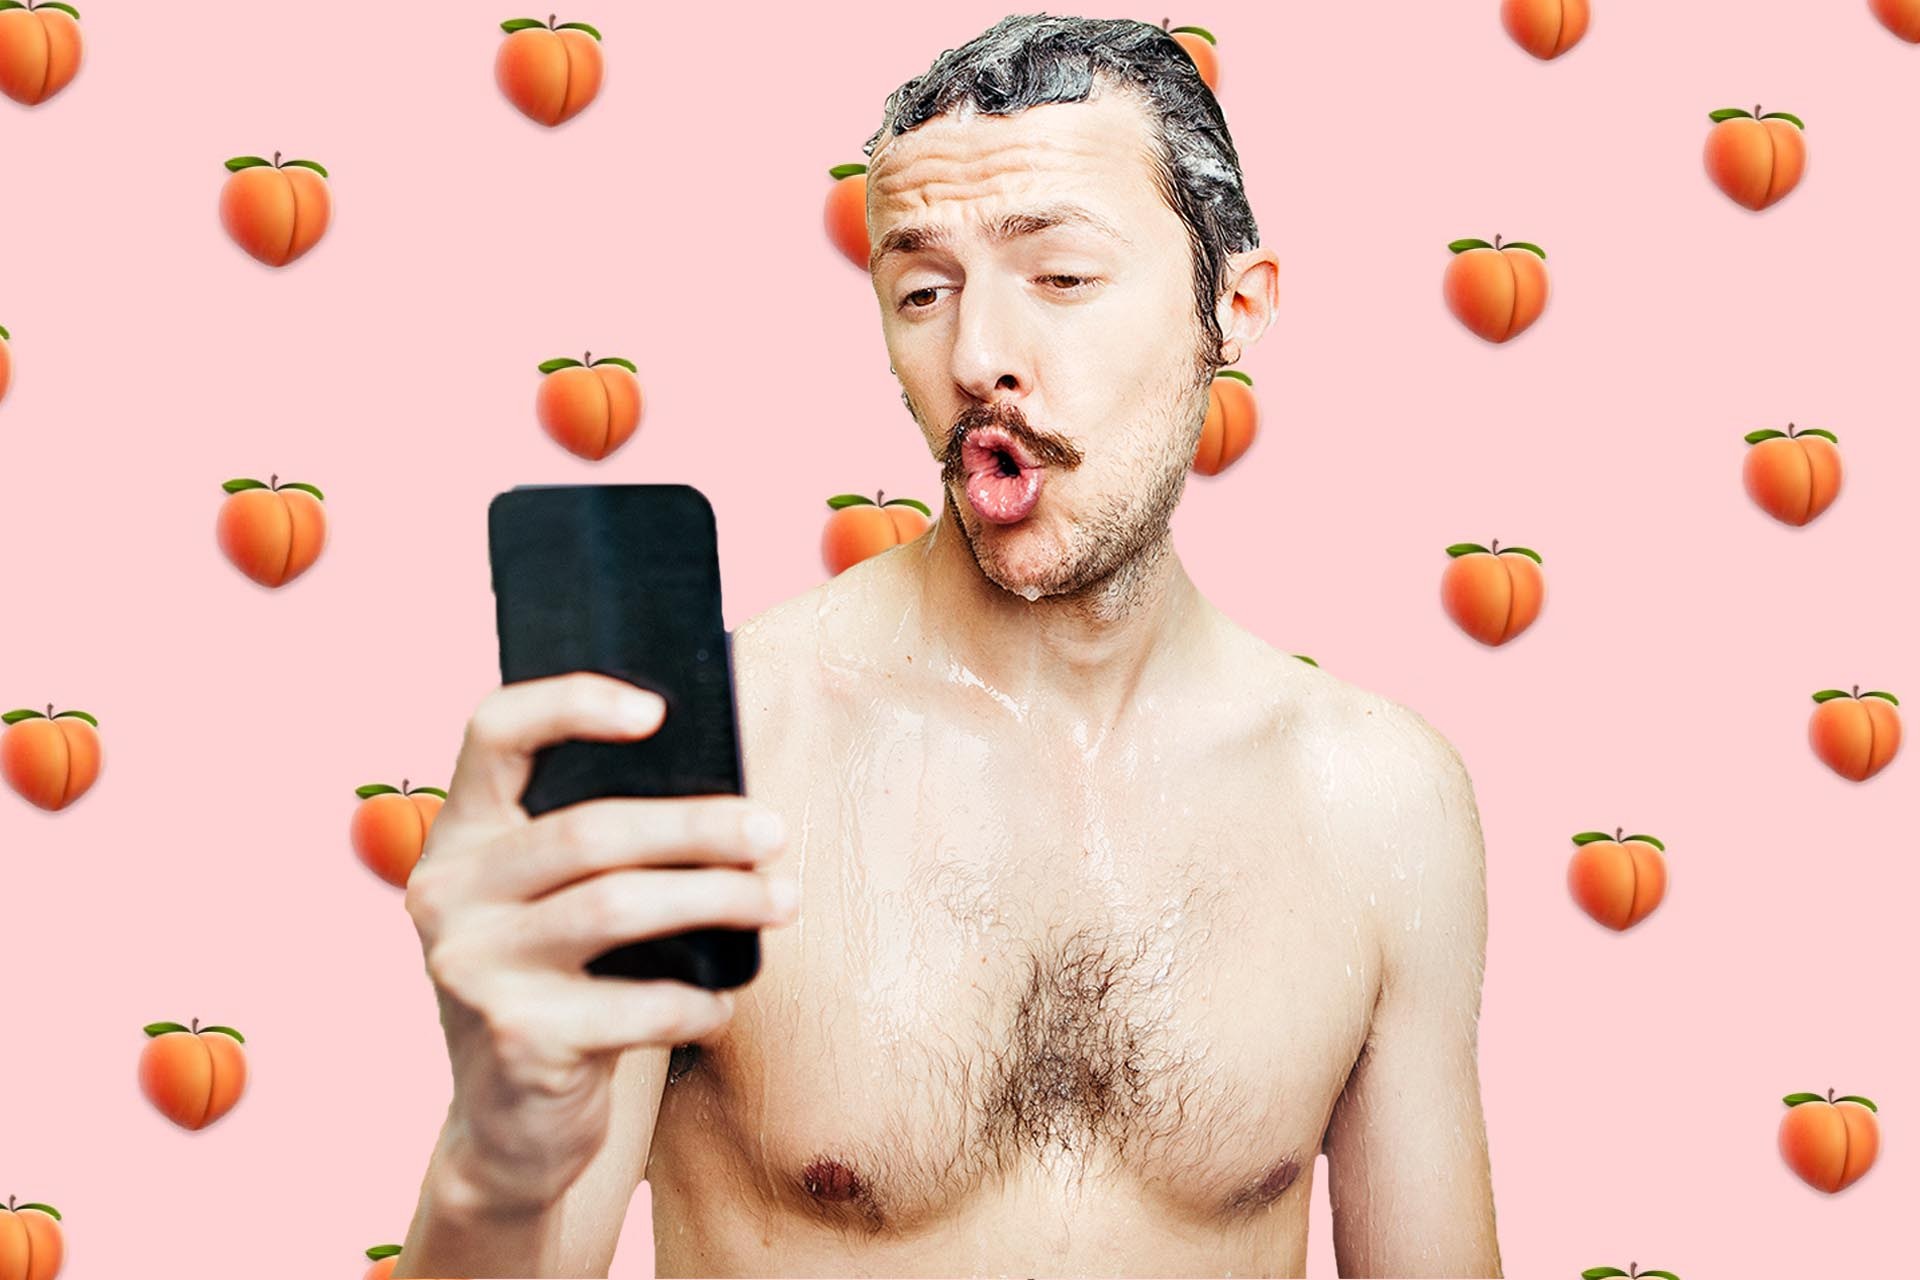 Science Of Nudes - Science Says This Is The Real Reason Men Send Dick Pics - GQ